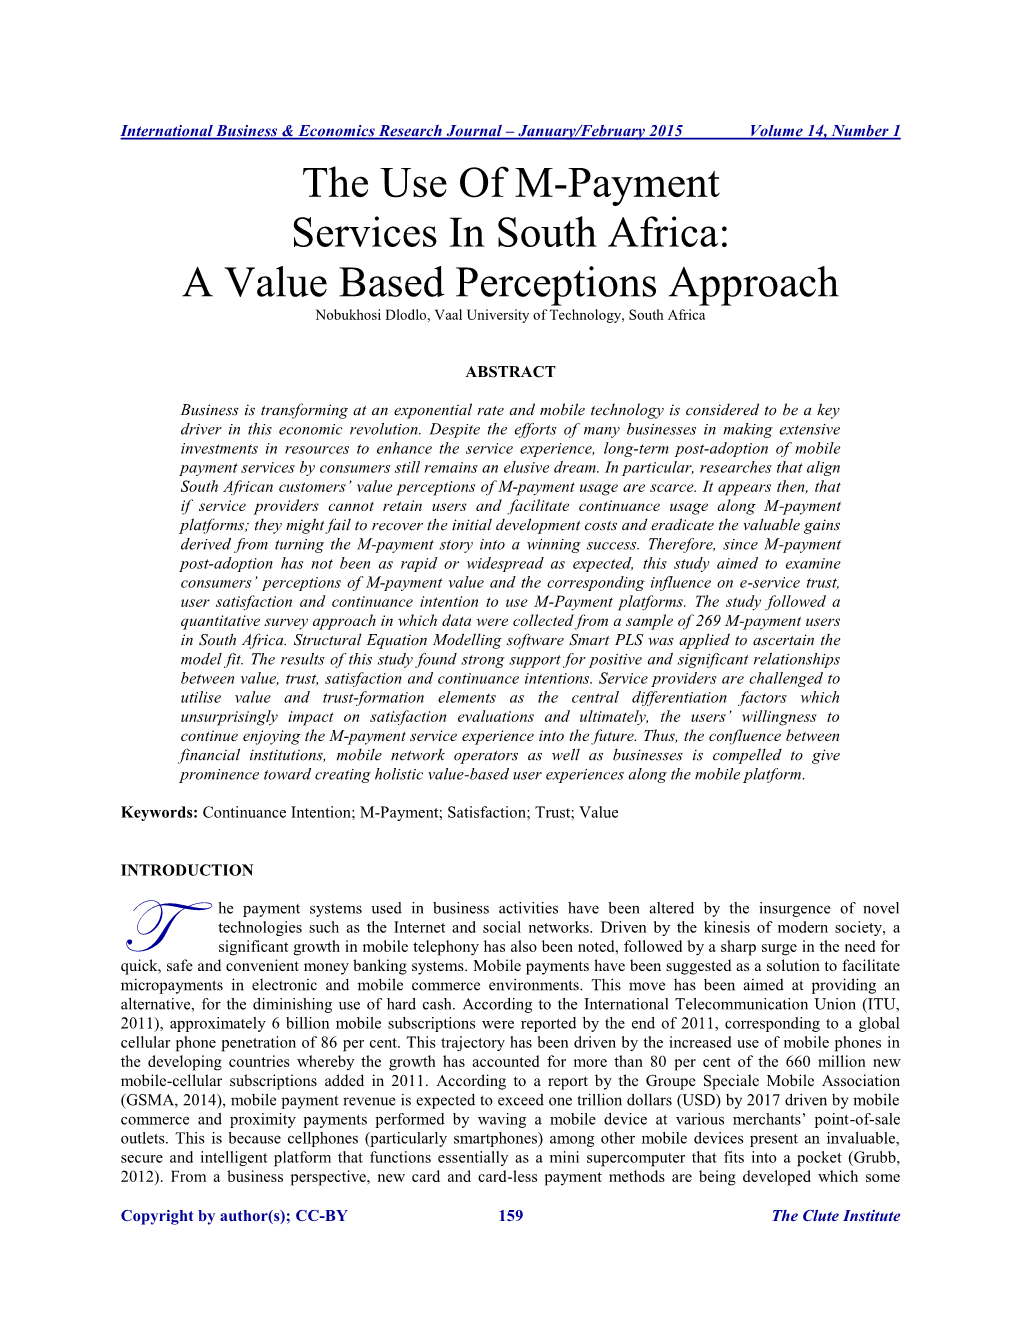 The Use of M-Payment Services in South Africa: a Value Based Perceptions Approach Nobukhosi Dlodlo, Vaal University of Technology, South Africa